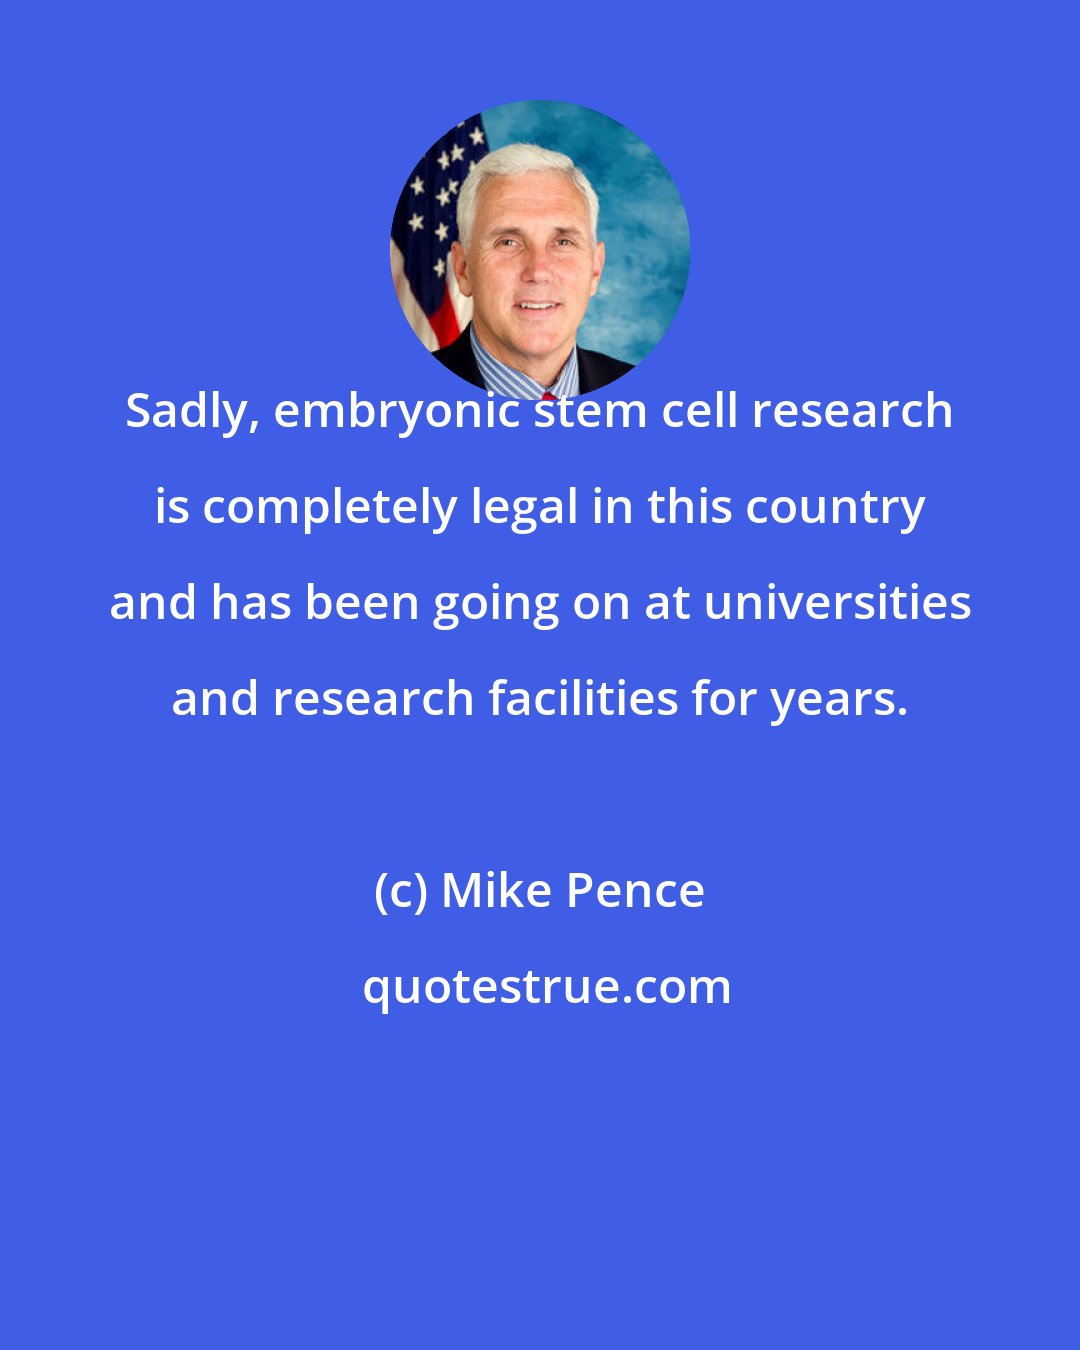 Mike Pence: Sadly, embryonic stem cell research is completely legal in this country and has been going on at universities and research facilities for years.